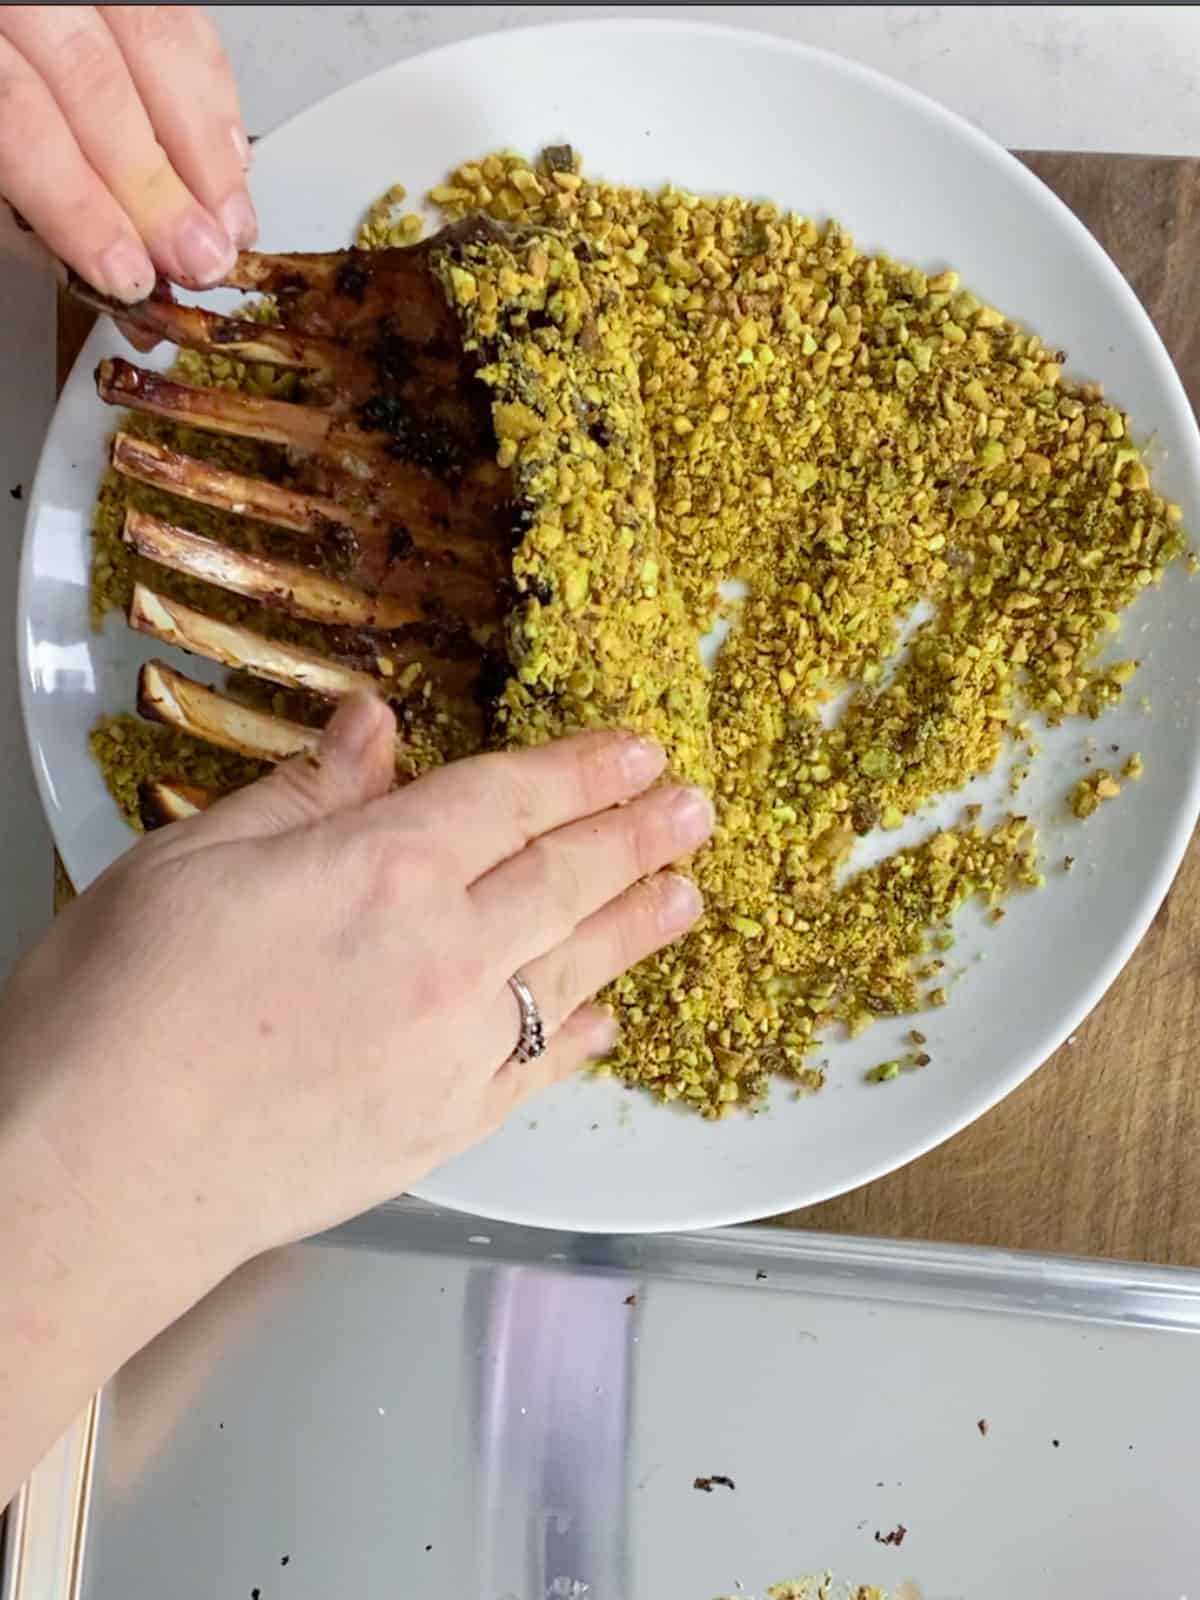 Press the crushed pistachios onto the rack of lamb.